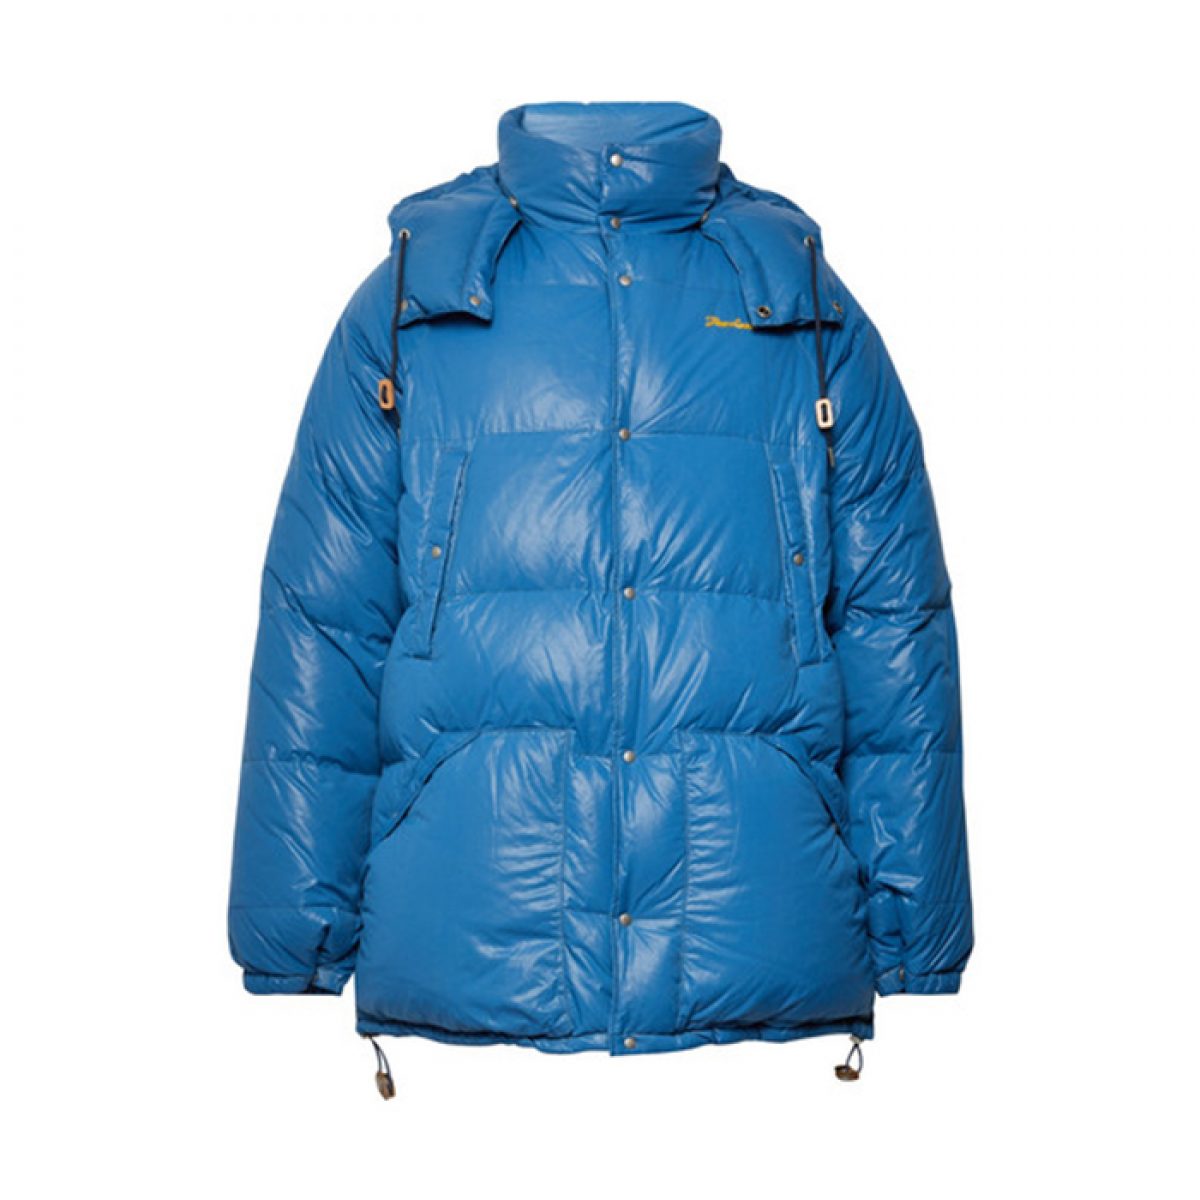 Kodiak Quilted Down Jacket - COOL HUNTING®